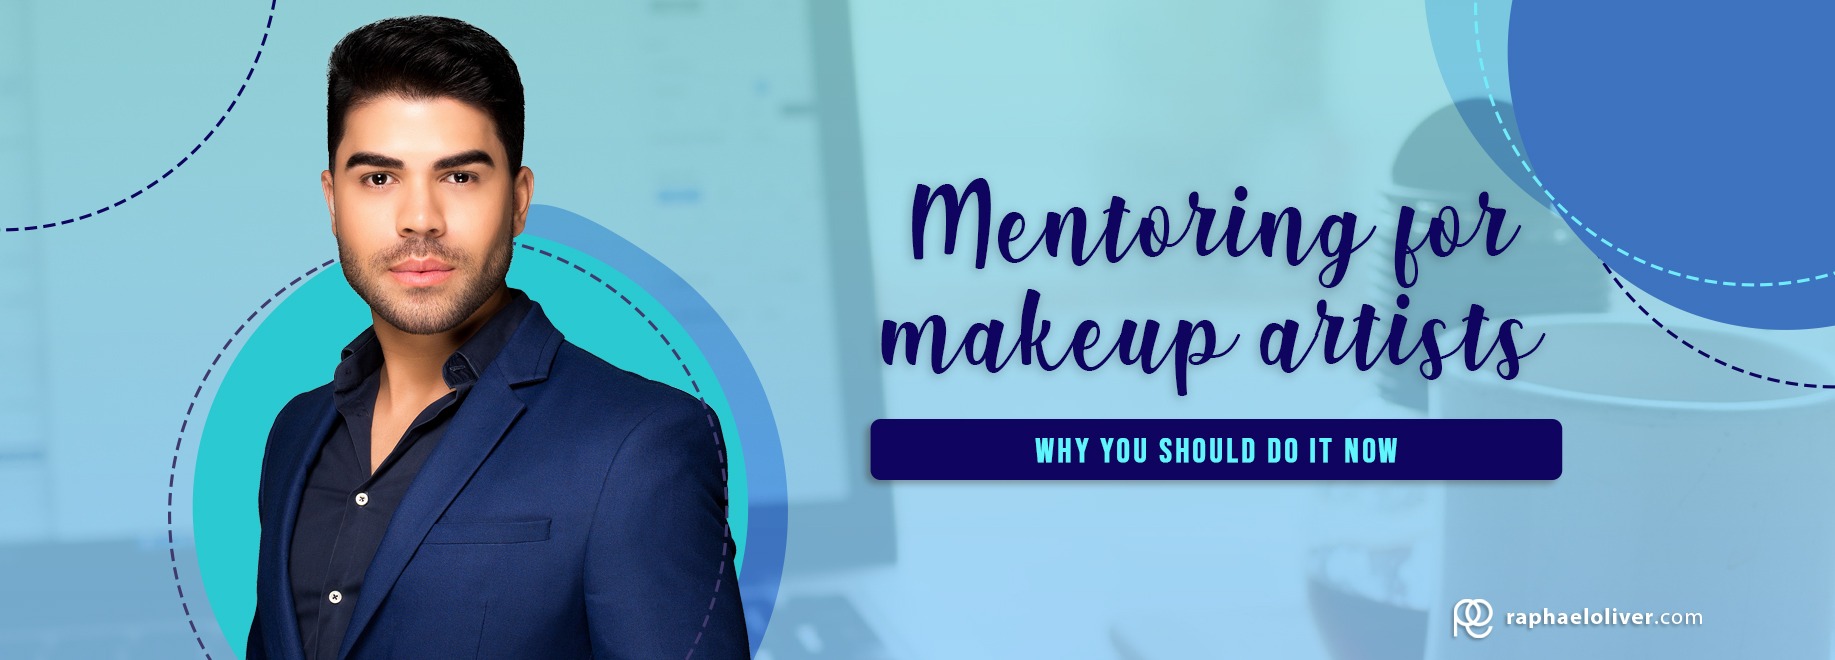 Mentoring for makeup artists: Why you should do it now